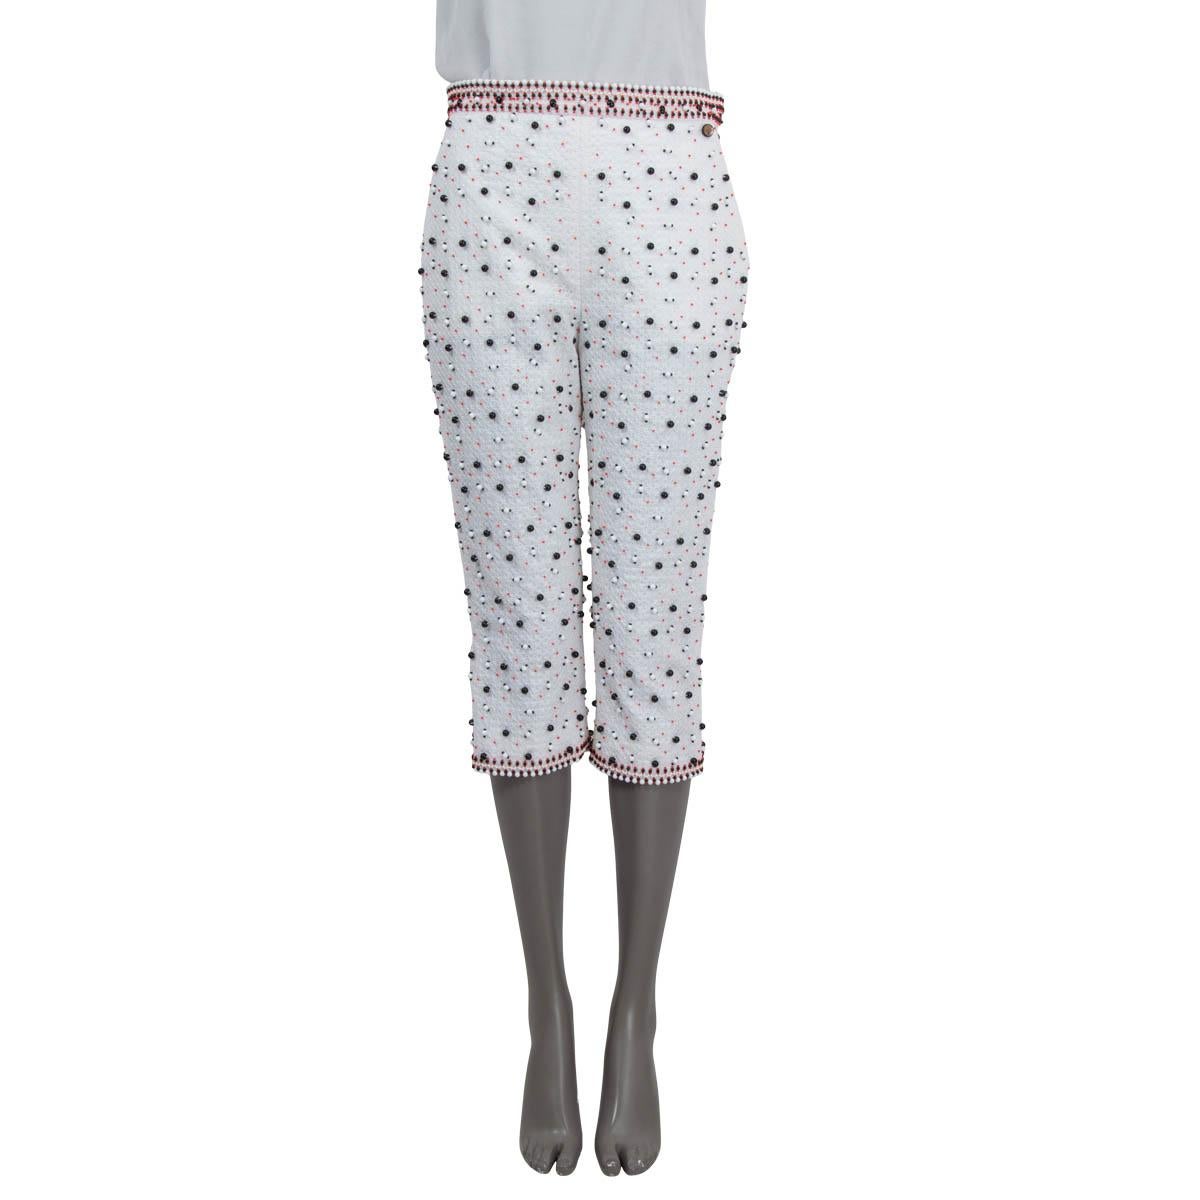 100% authentic Chanel 2019 La Pausa capri pants in white cotton (86%) and polyester (14%). Feature pearls all over the pants, two side slit pockets and zipped cuffs. Open with a concealed zipper, two hooks and a push button on the side. Lined in